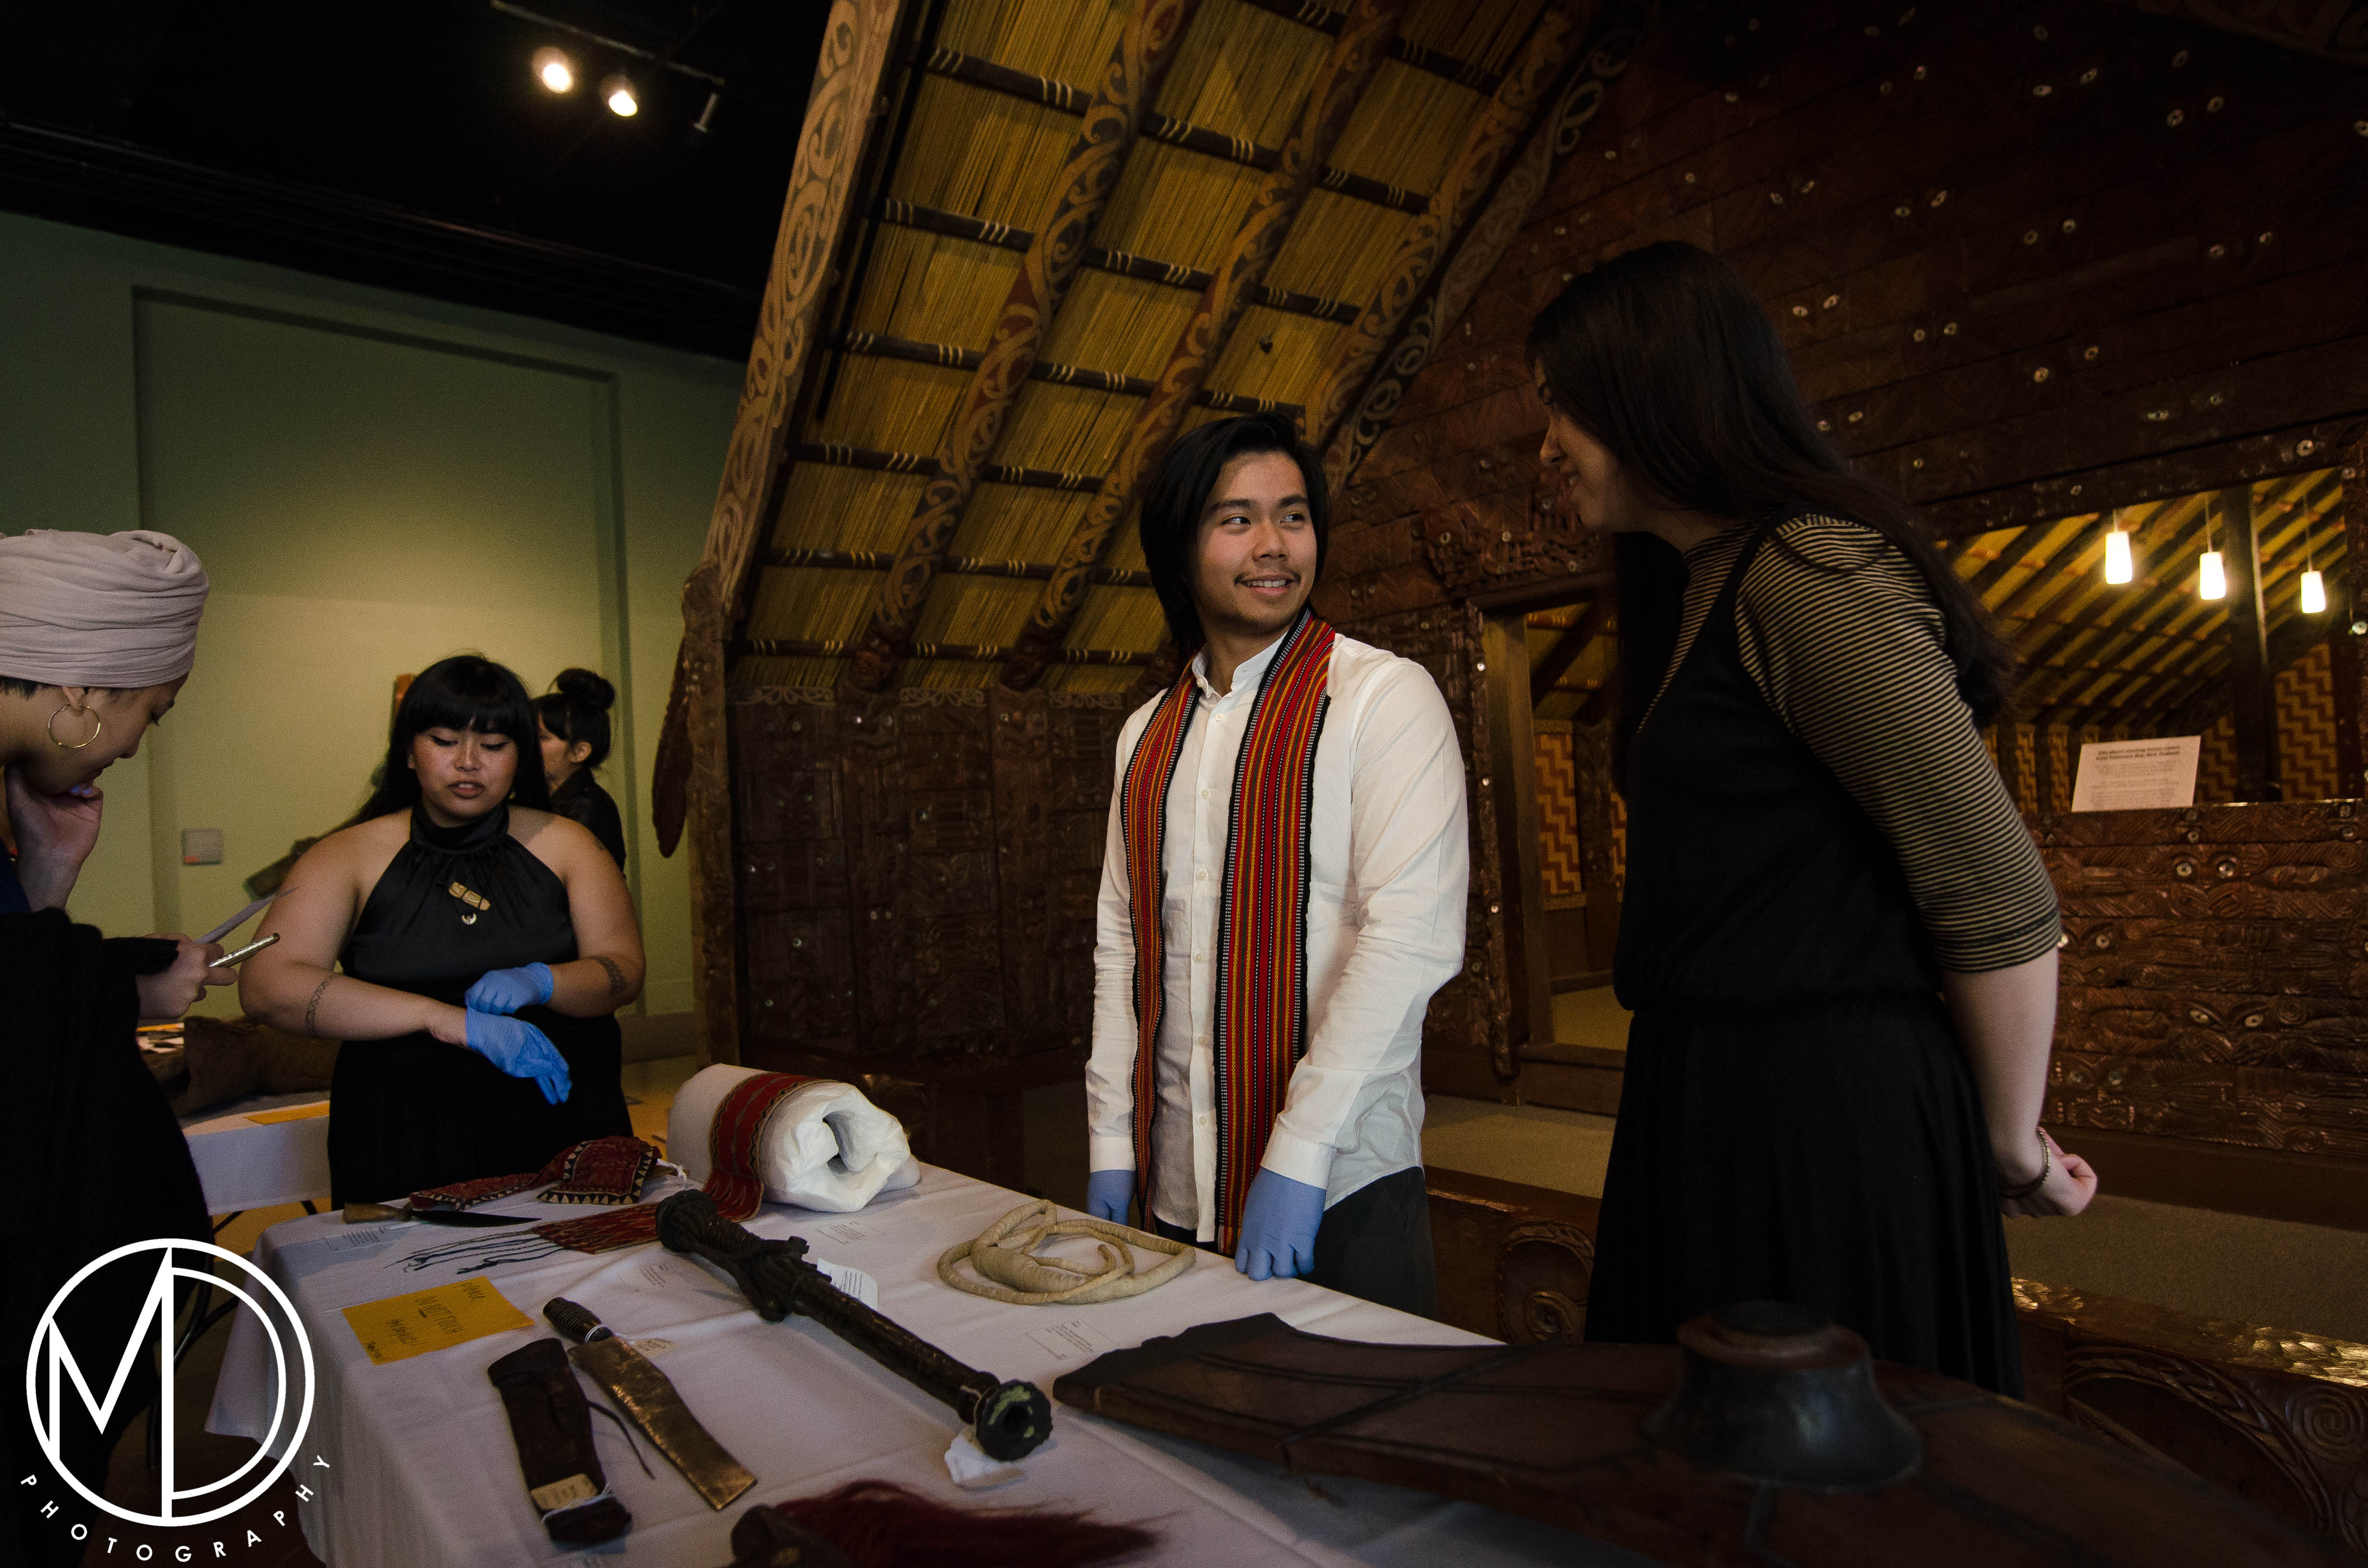 Avigail Bautista, Tristan Espinoza, and Loren Ibach watch over the object table. (c) Field Museum of Natural History - CC BY-NC 4.0